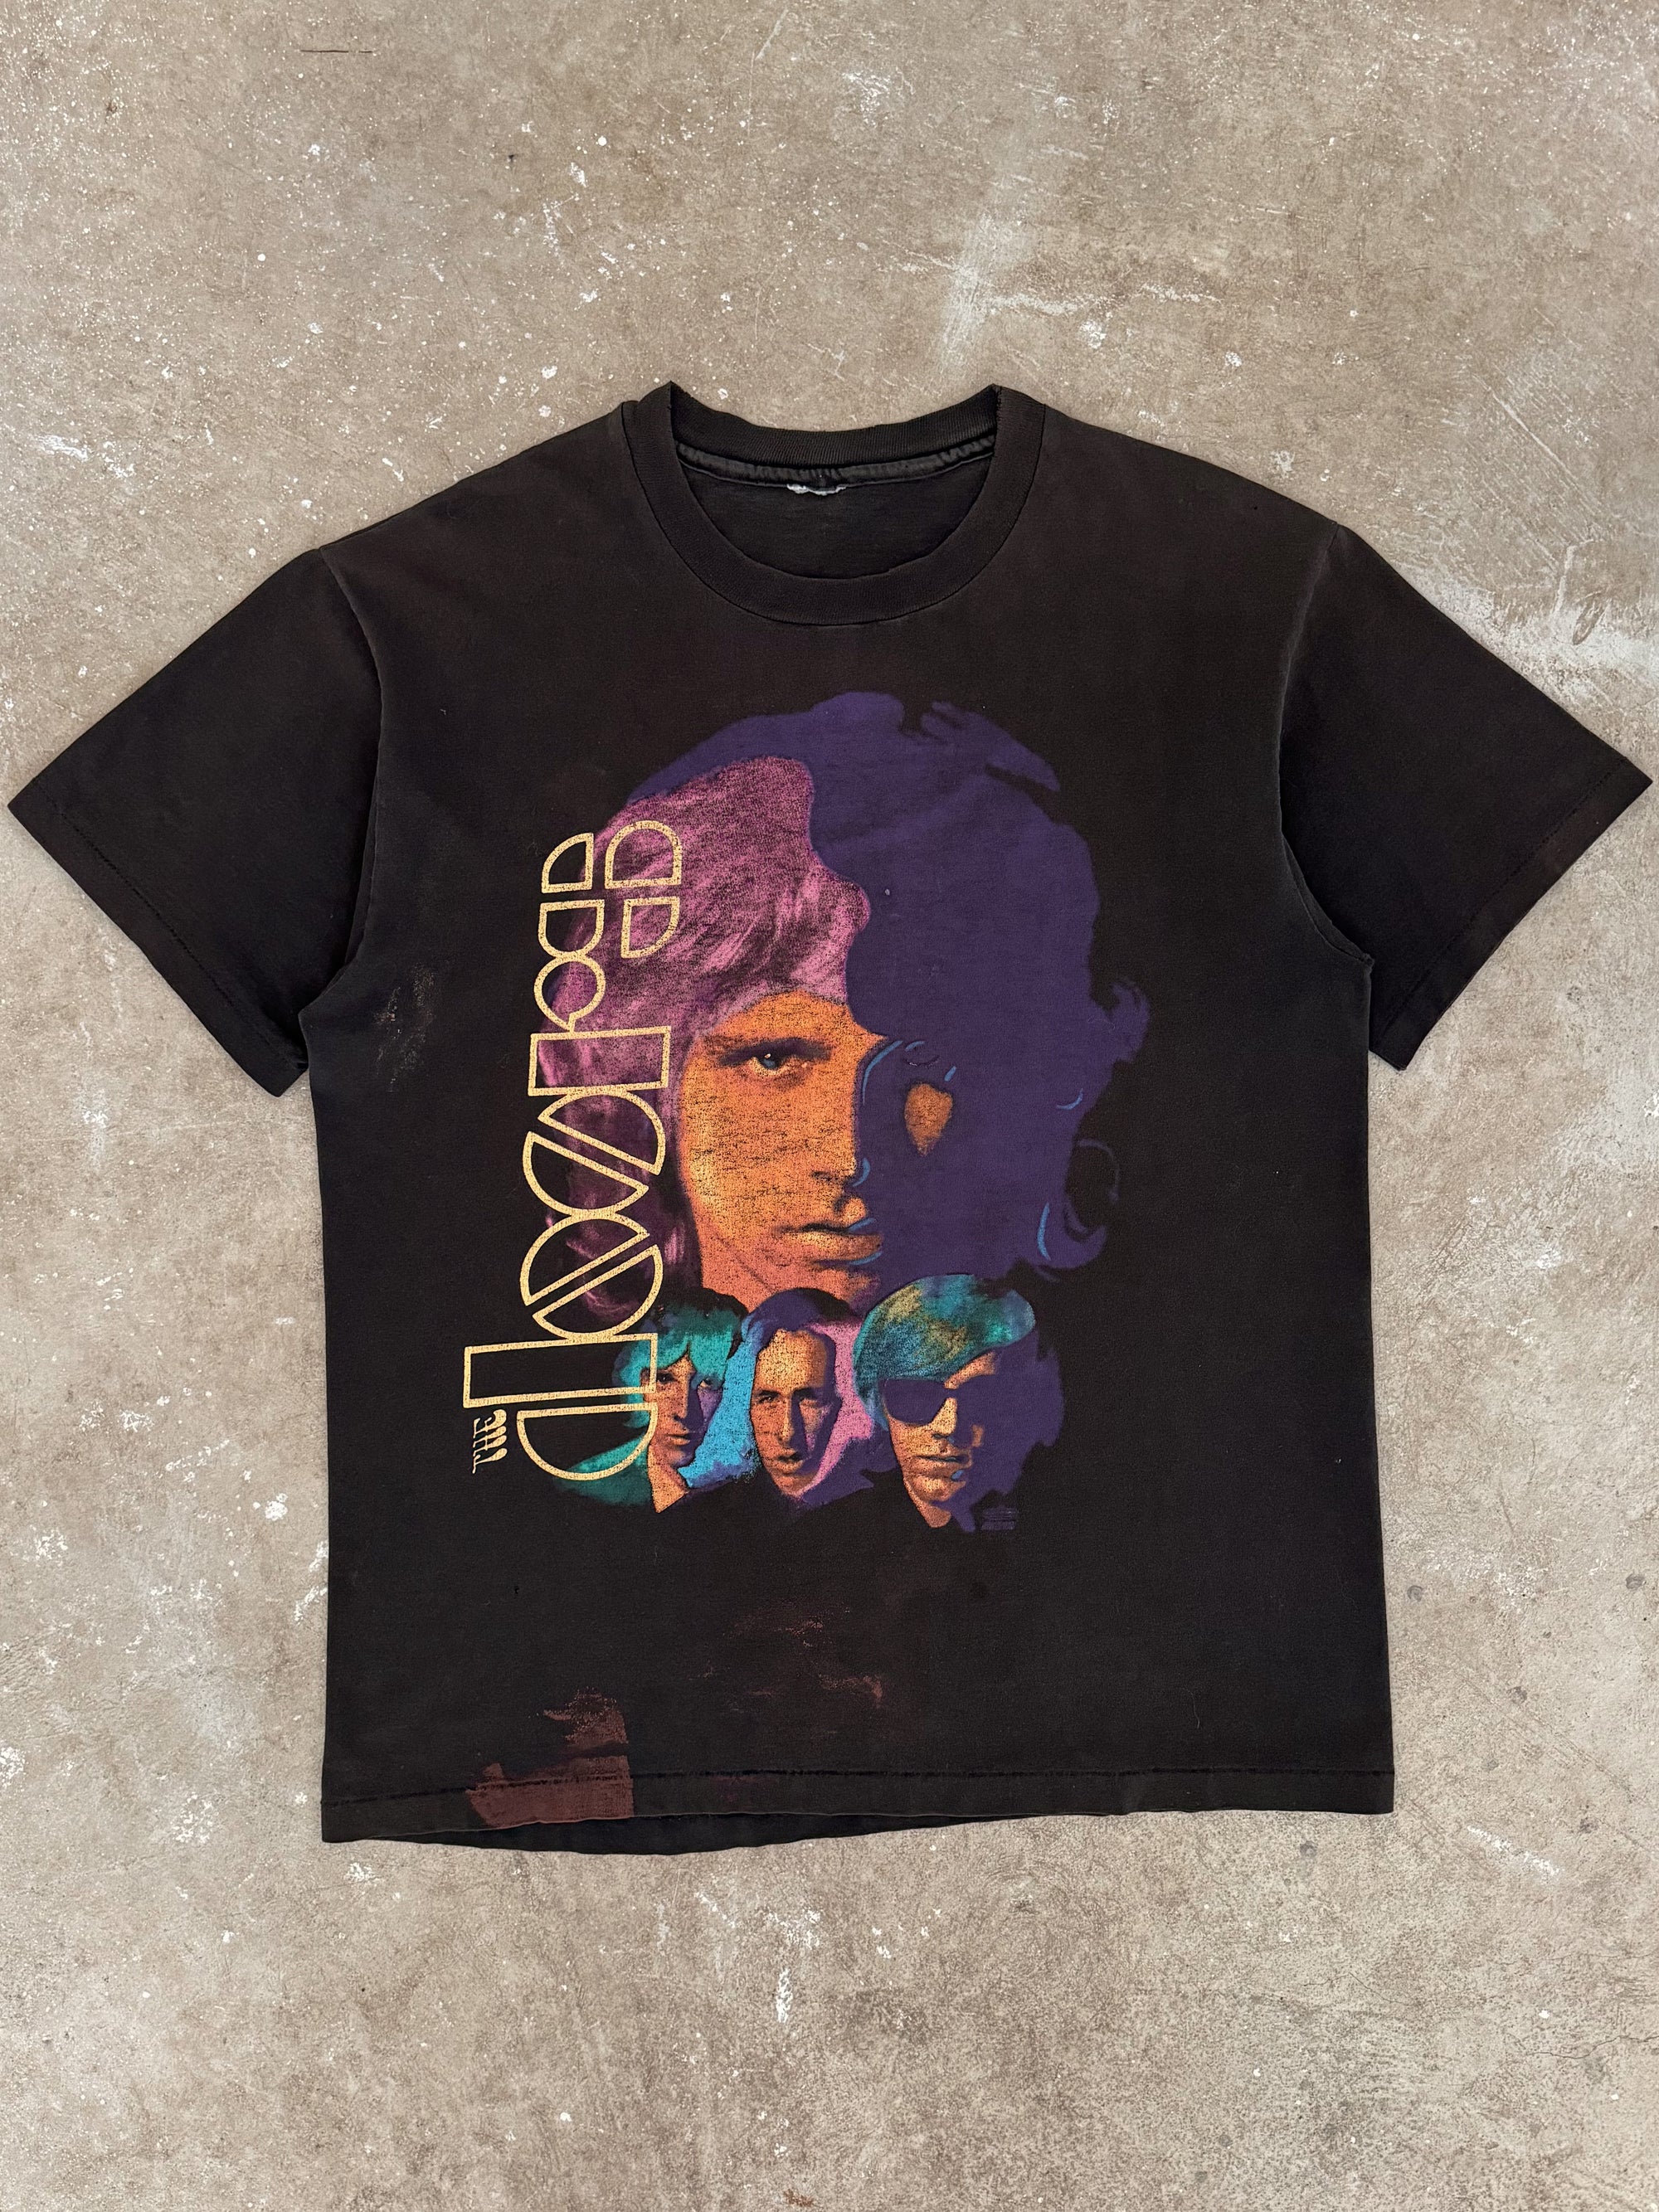 1990s The Doors "No One Here Gets Out Alive" Tee (L)